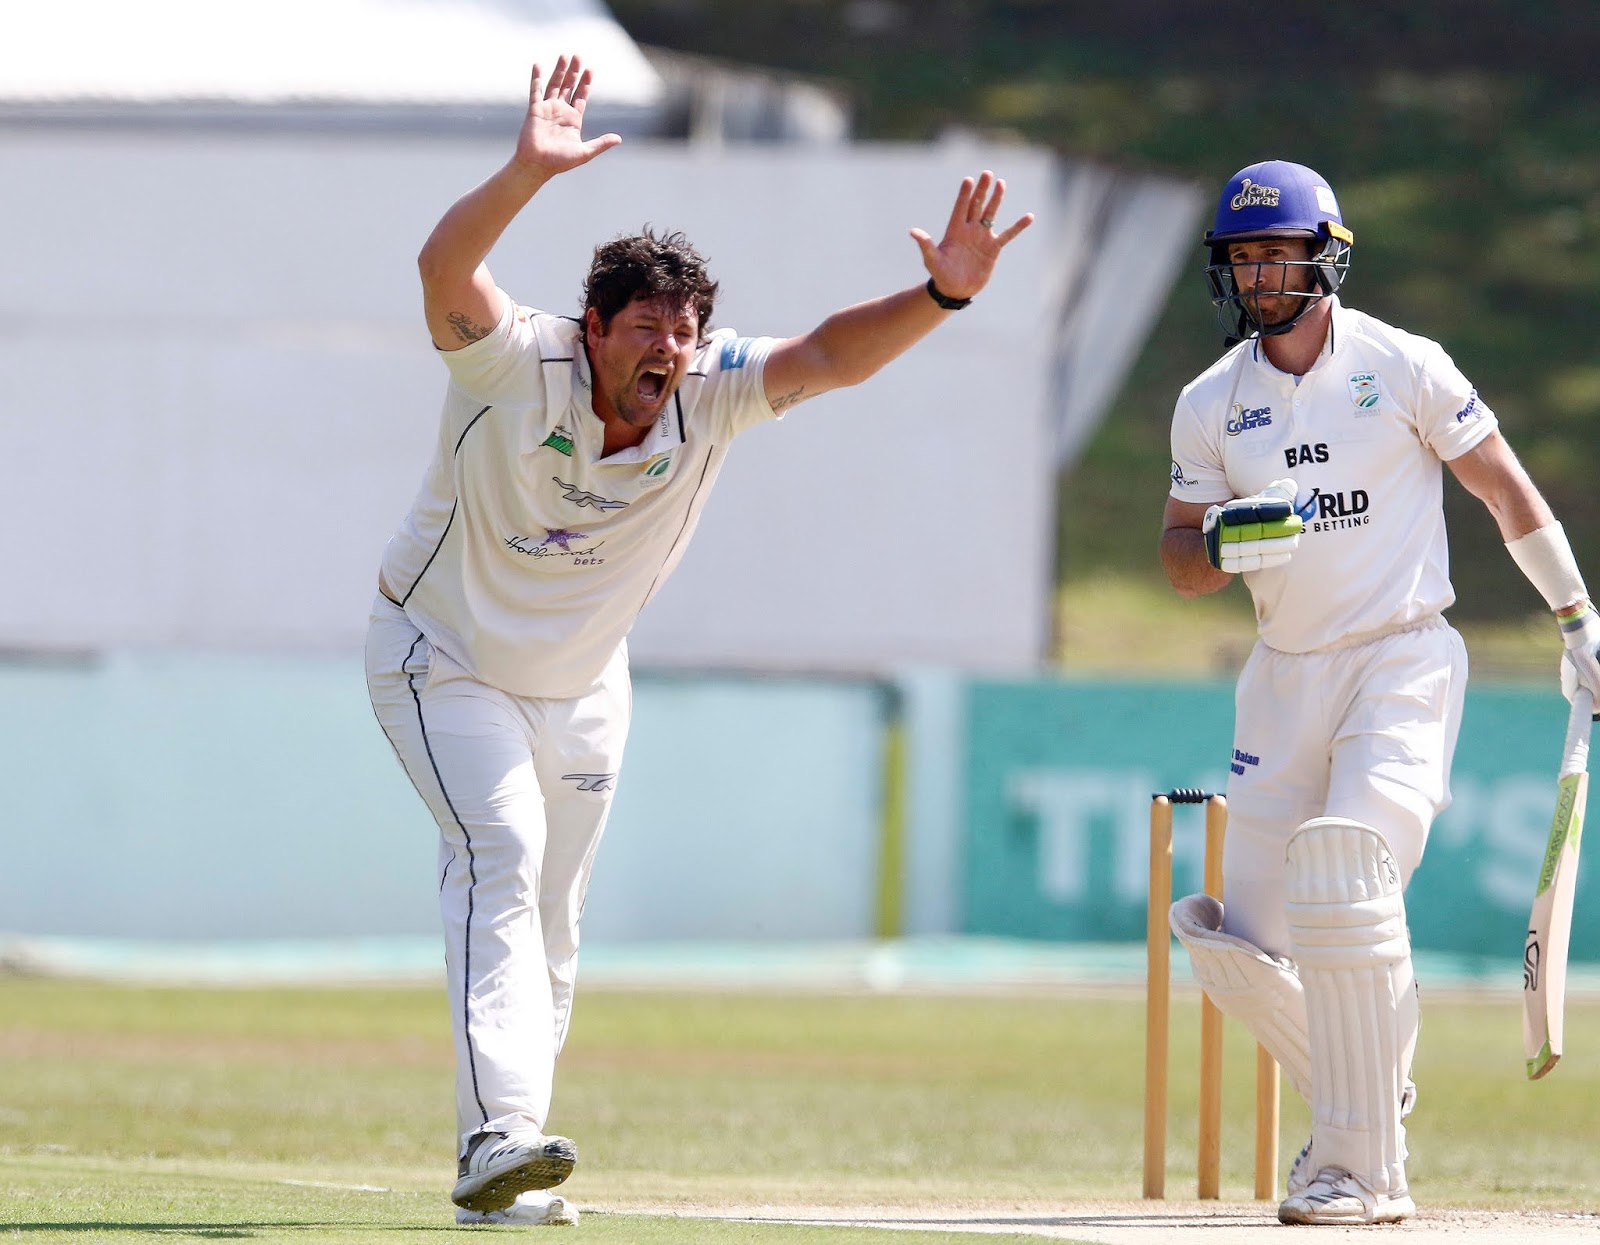   Rob Frylinck appeals successfully for the wicket of World Sports Betting Cape Cobras captain Pieter Malan on day three of their CSA 4-Day Domestic Series match at the Pietermaritzburg Oval on Wednesday.